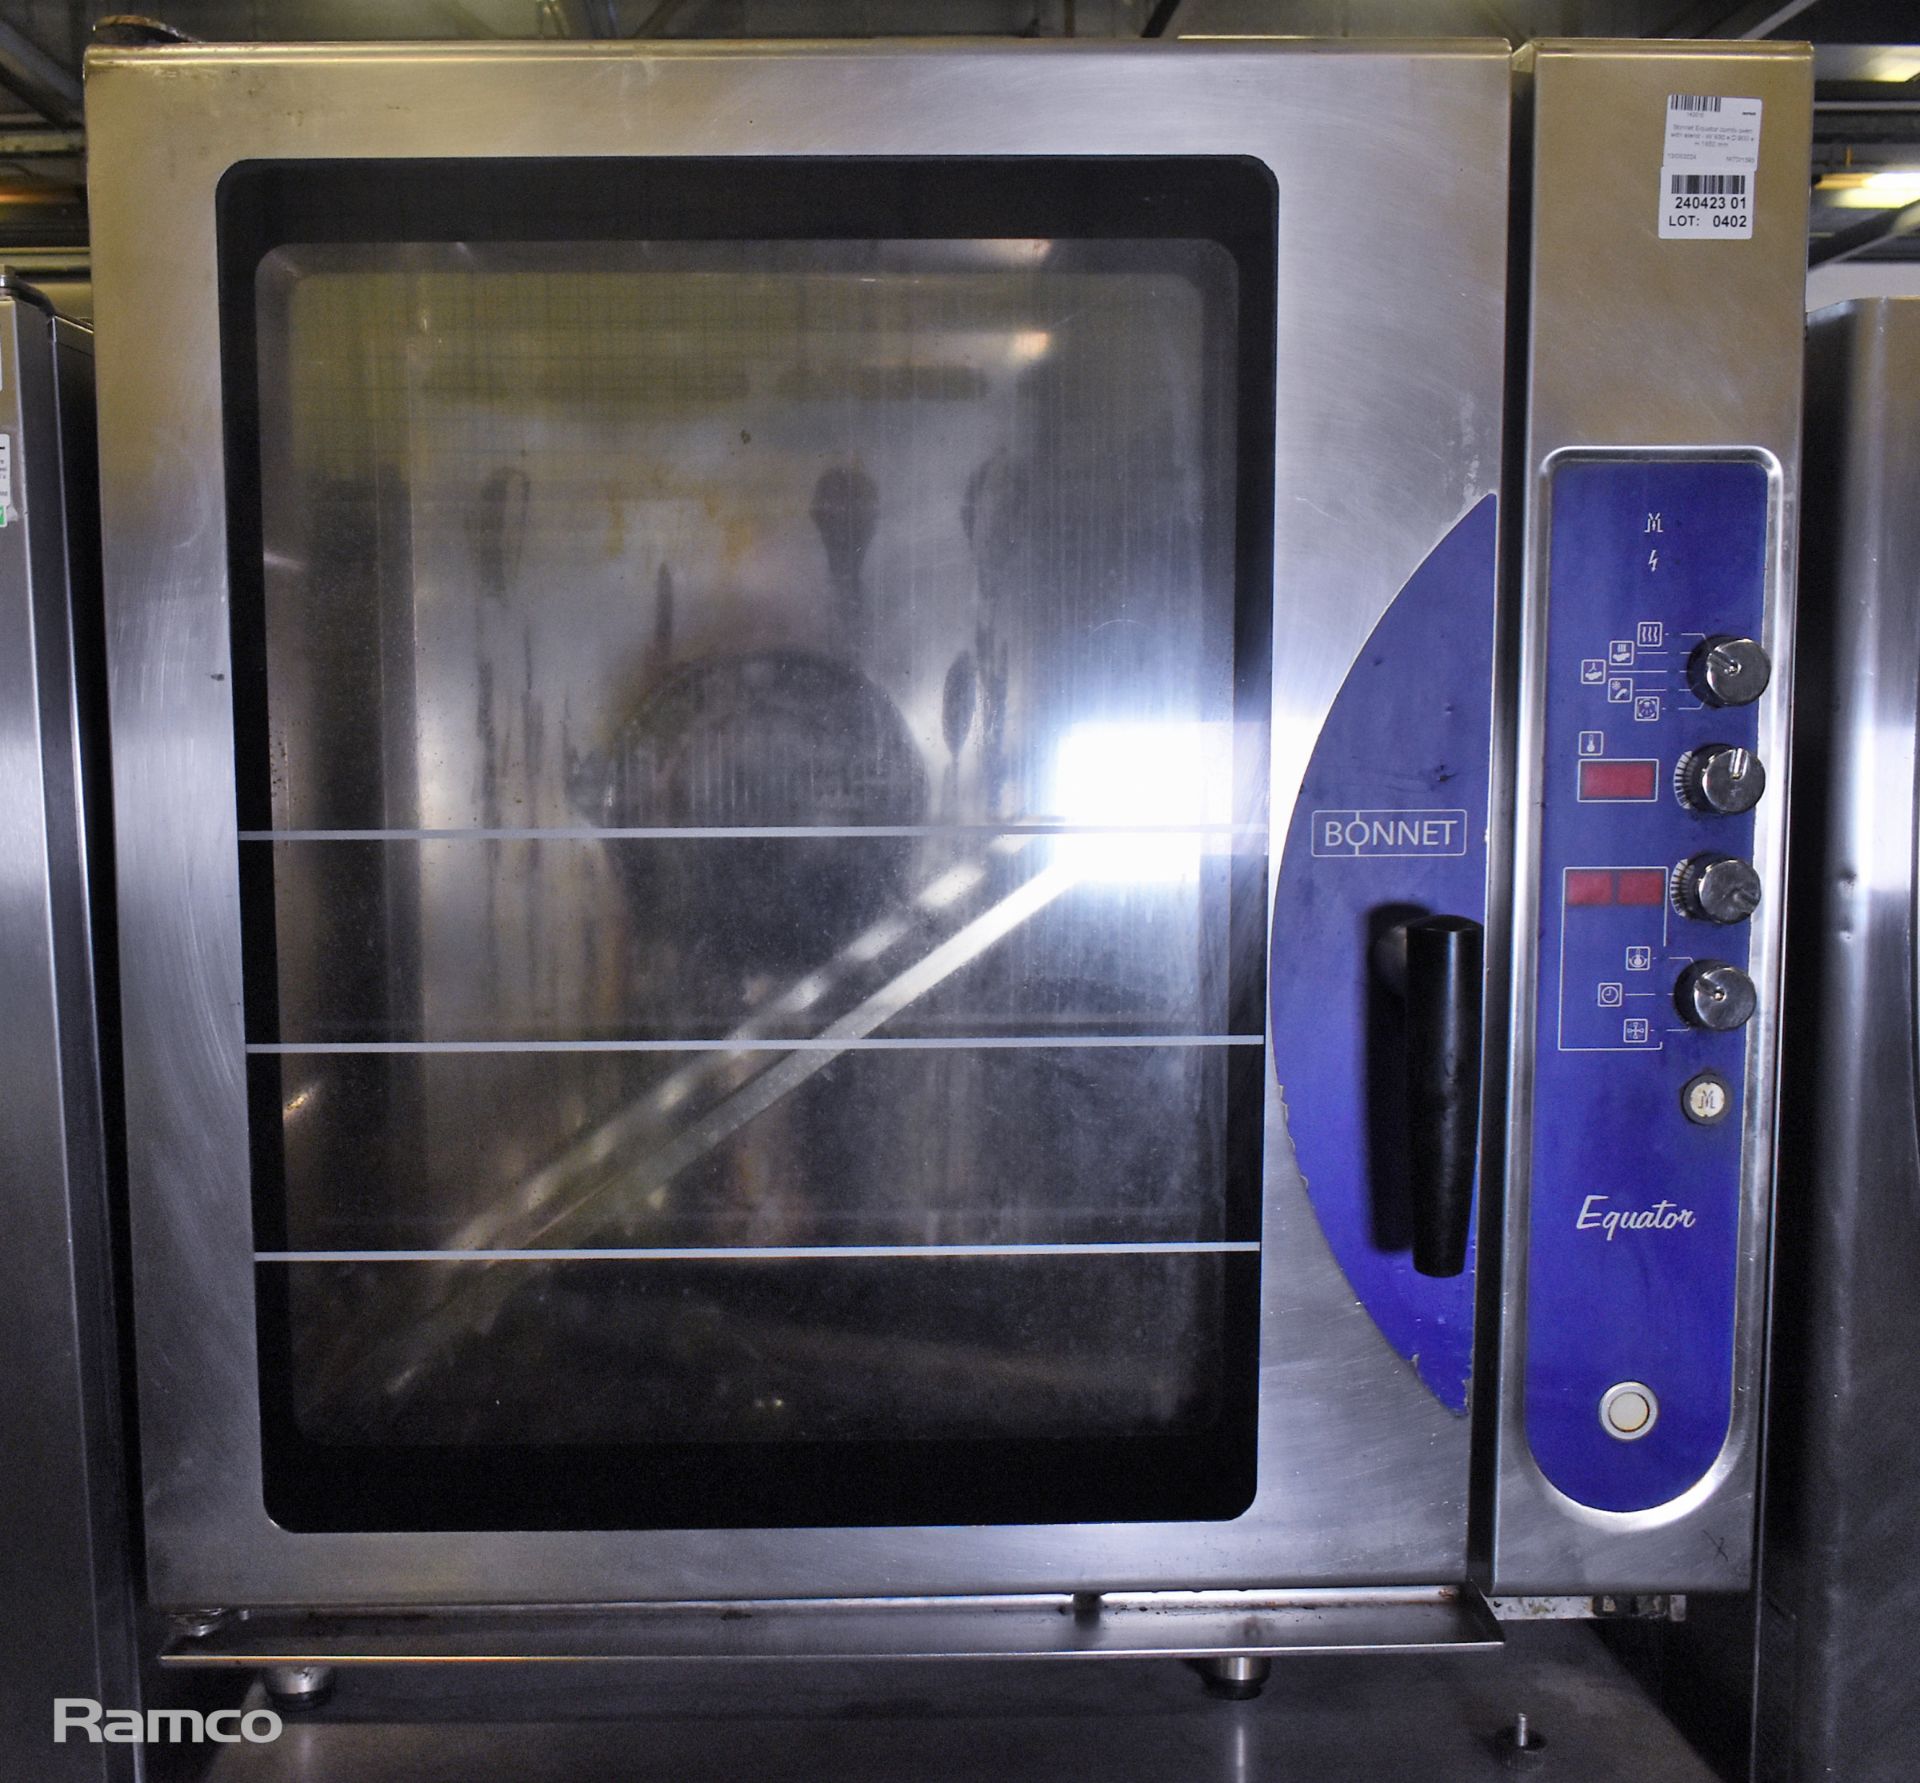 Bonnet Equator combi oven with stand - W 930 x D 900 x H 1850mm - Image 2 of 7